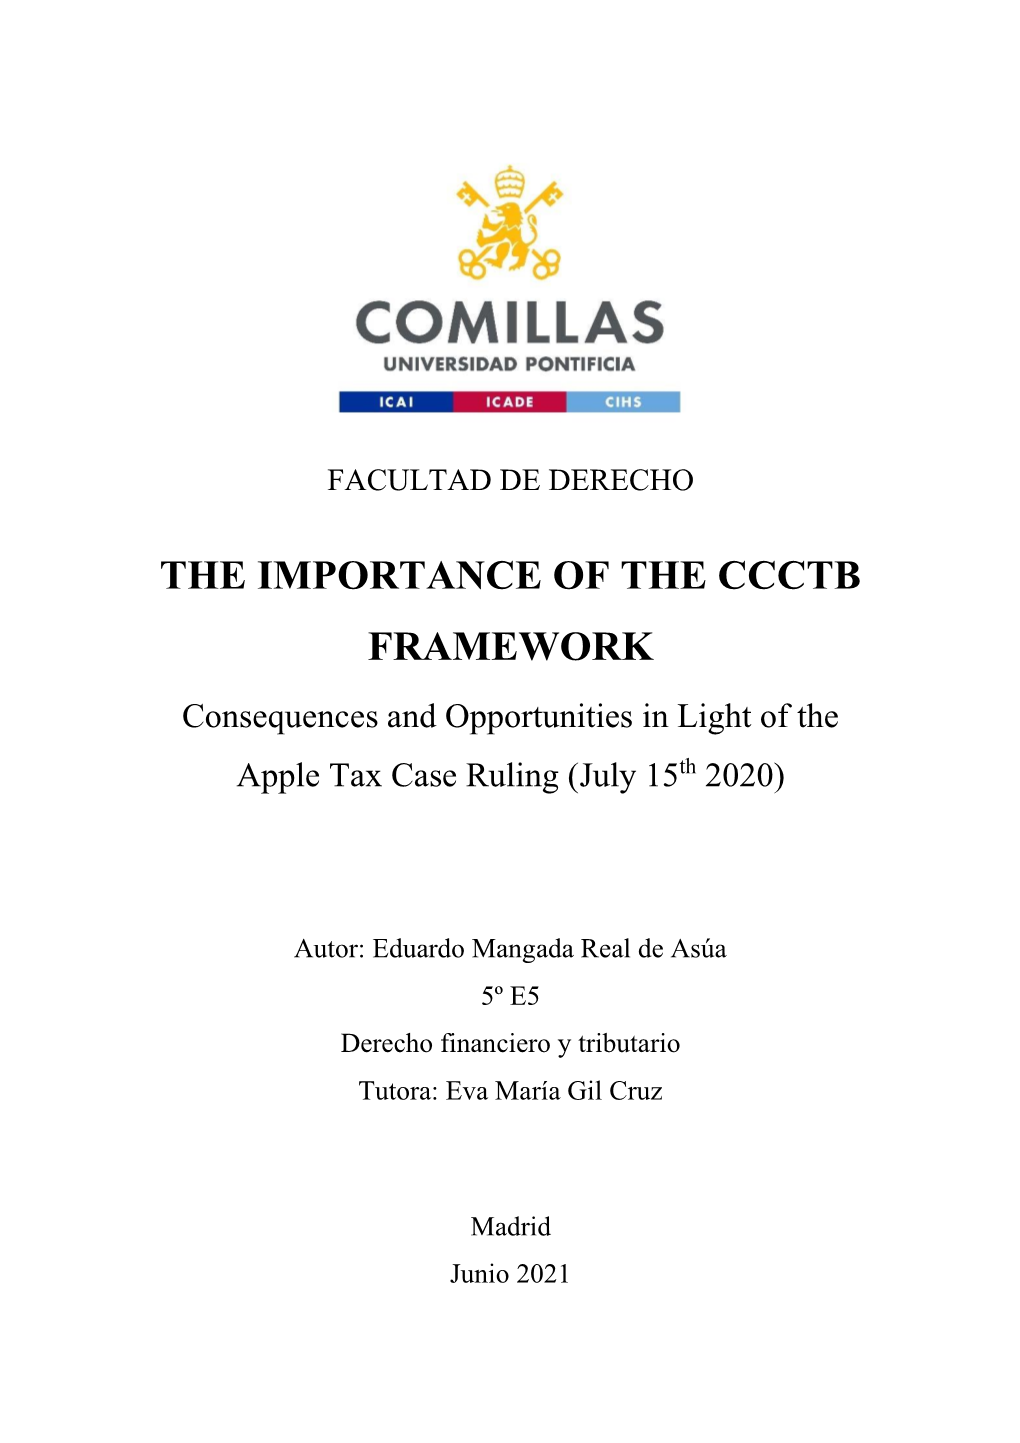 The Importance of the Ccctb Framework